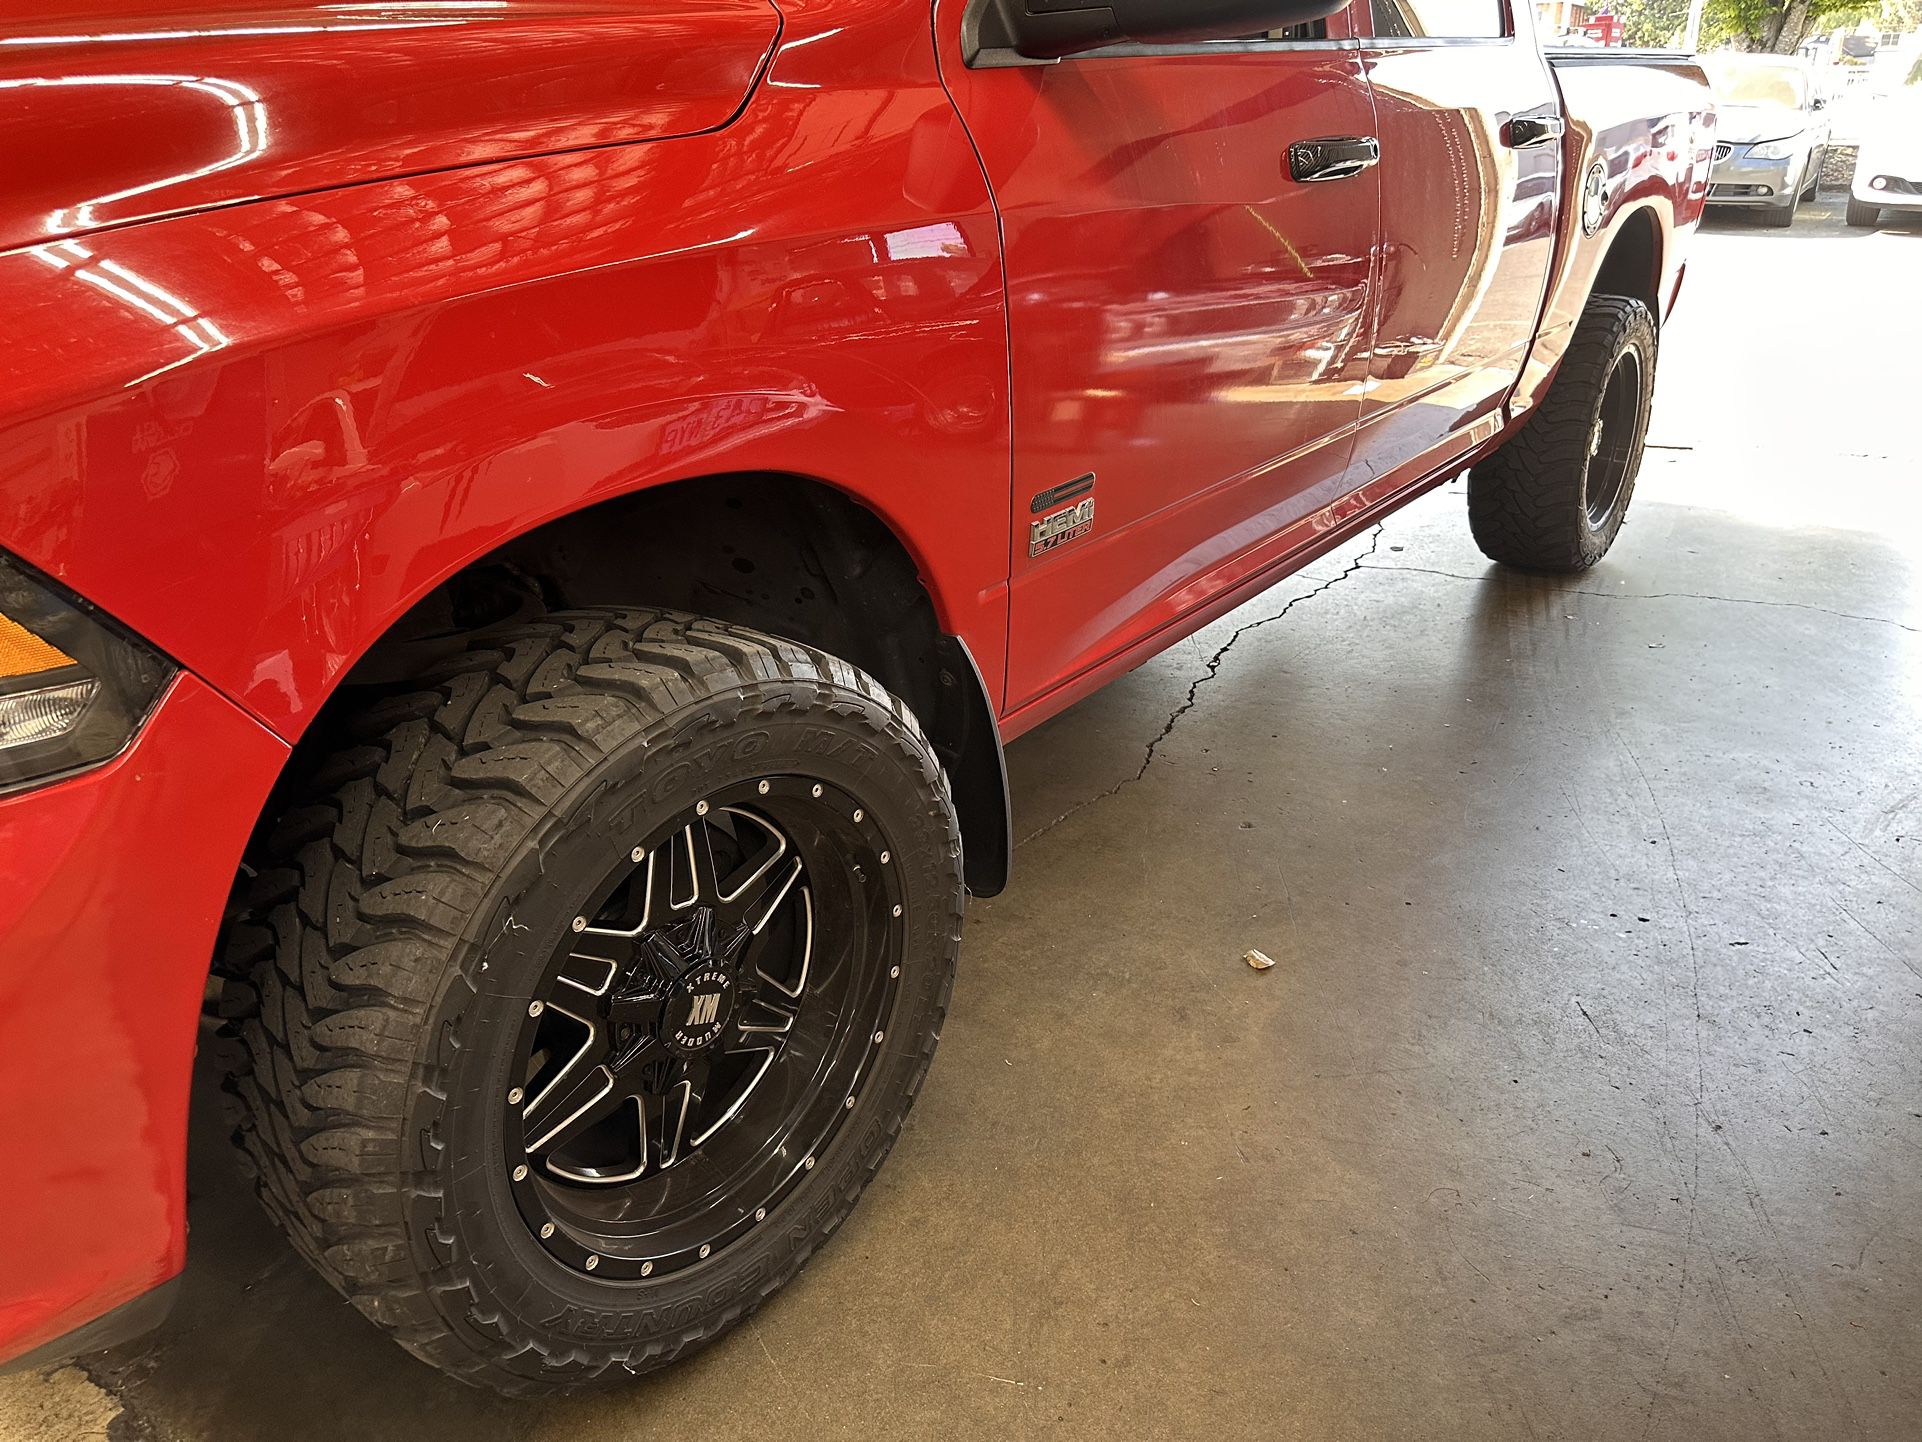 If You  Can  See This Add - Rim & Tires Still Available /Toyo Tires &XM Mud Rim  - $1,250.00 As Of 1/30/2024 -Still Available